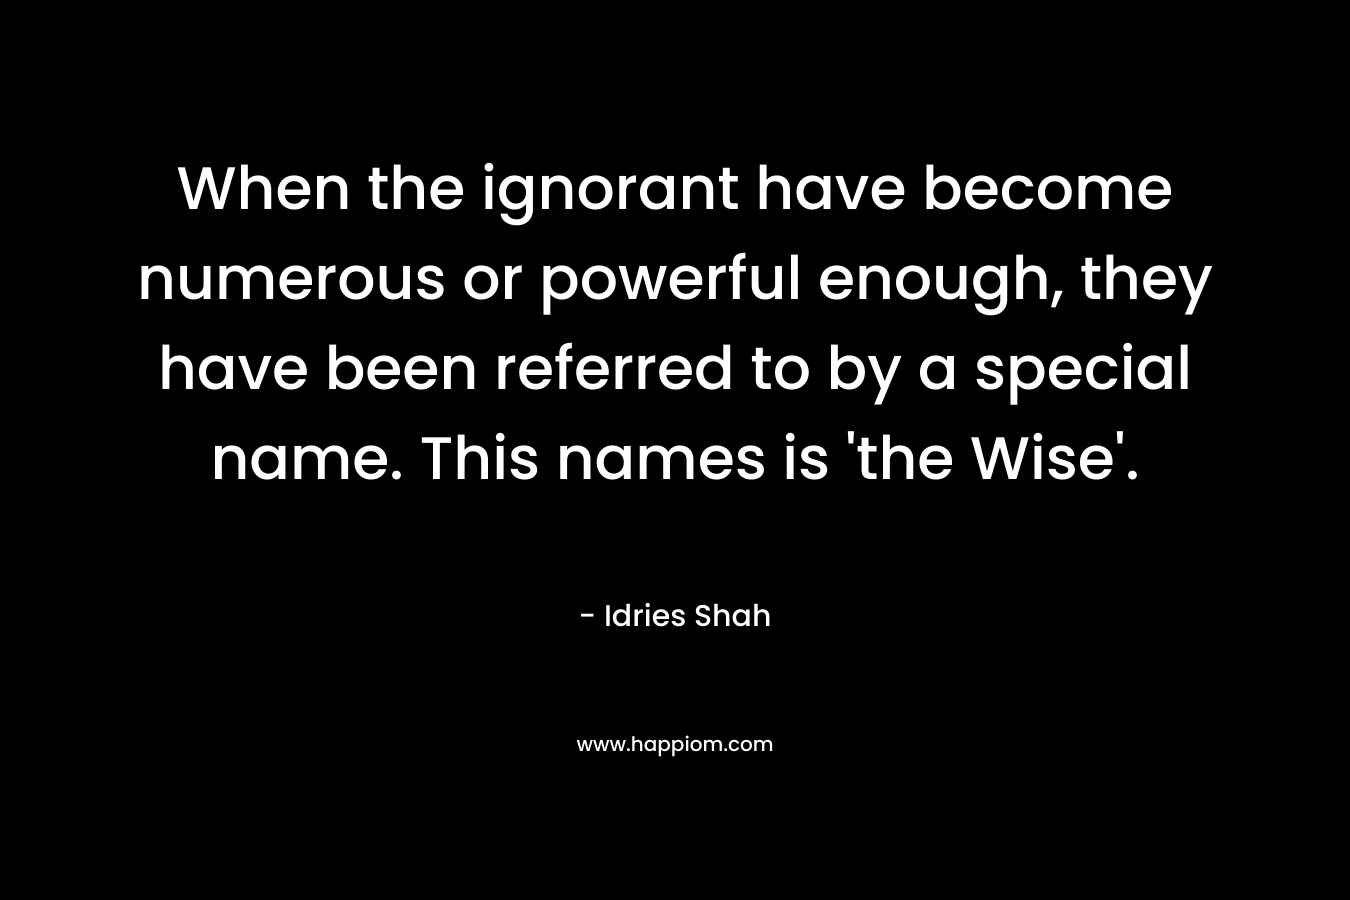 When the ignorant have become numerous or powerful enough, they have been referred to by a special name. This names is ‘the Wise’. – Idries Shah